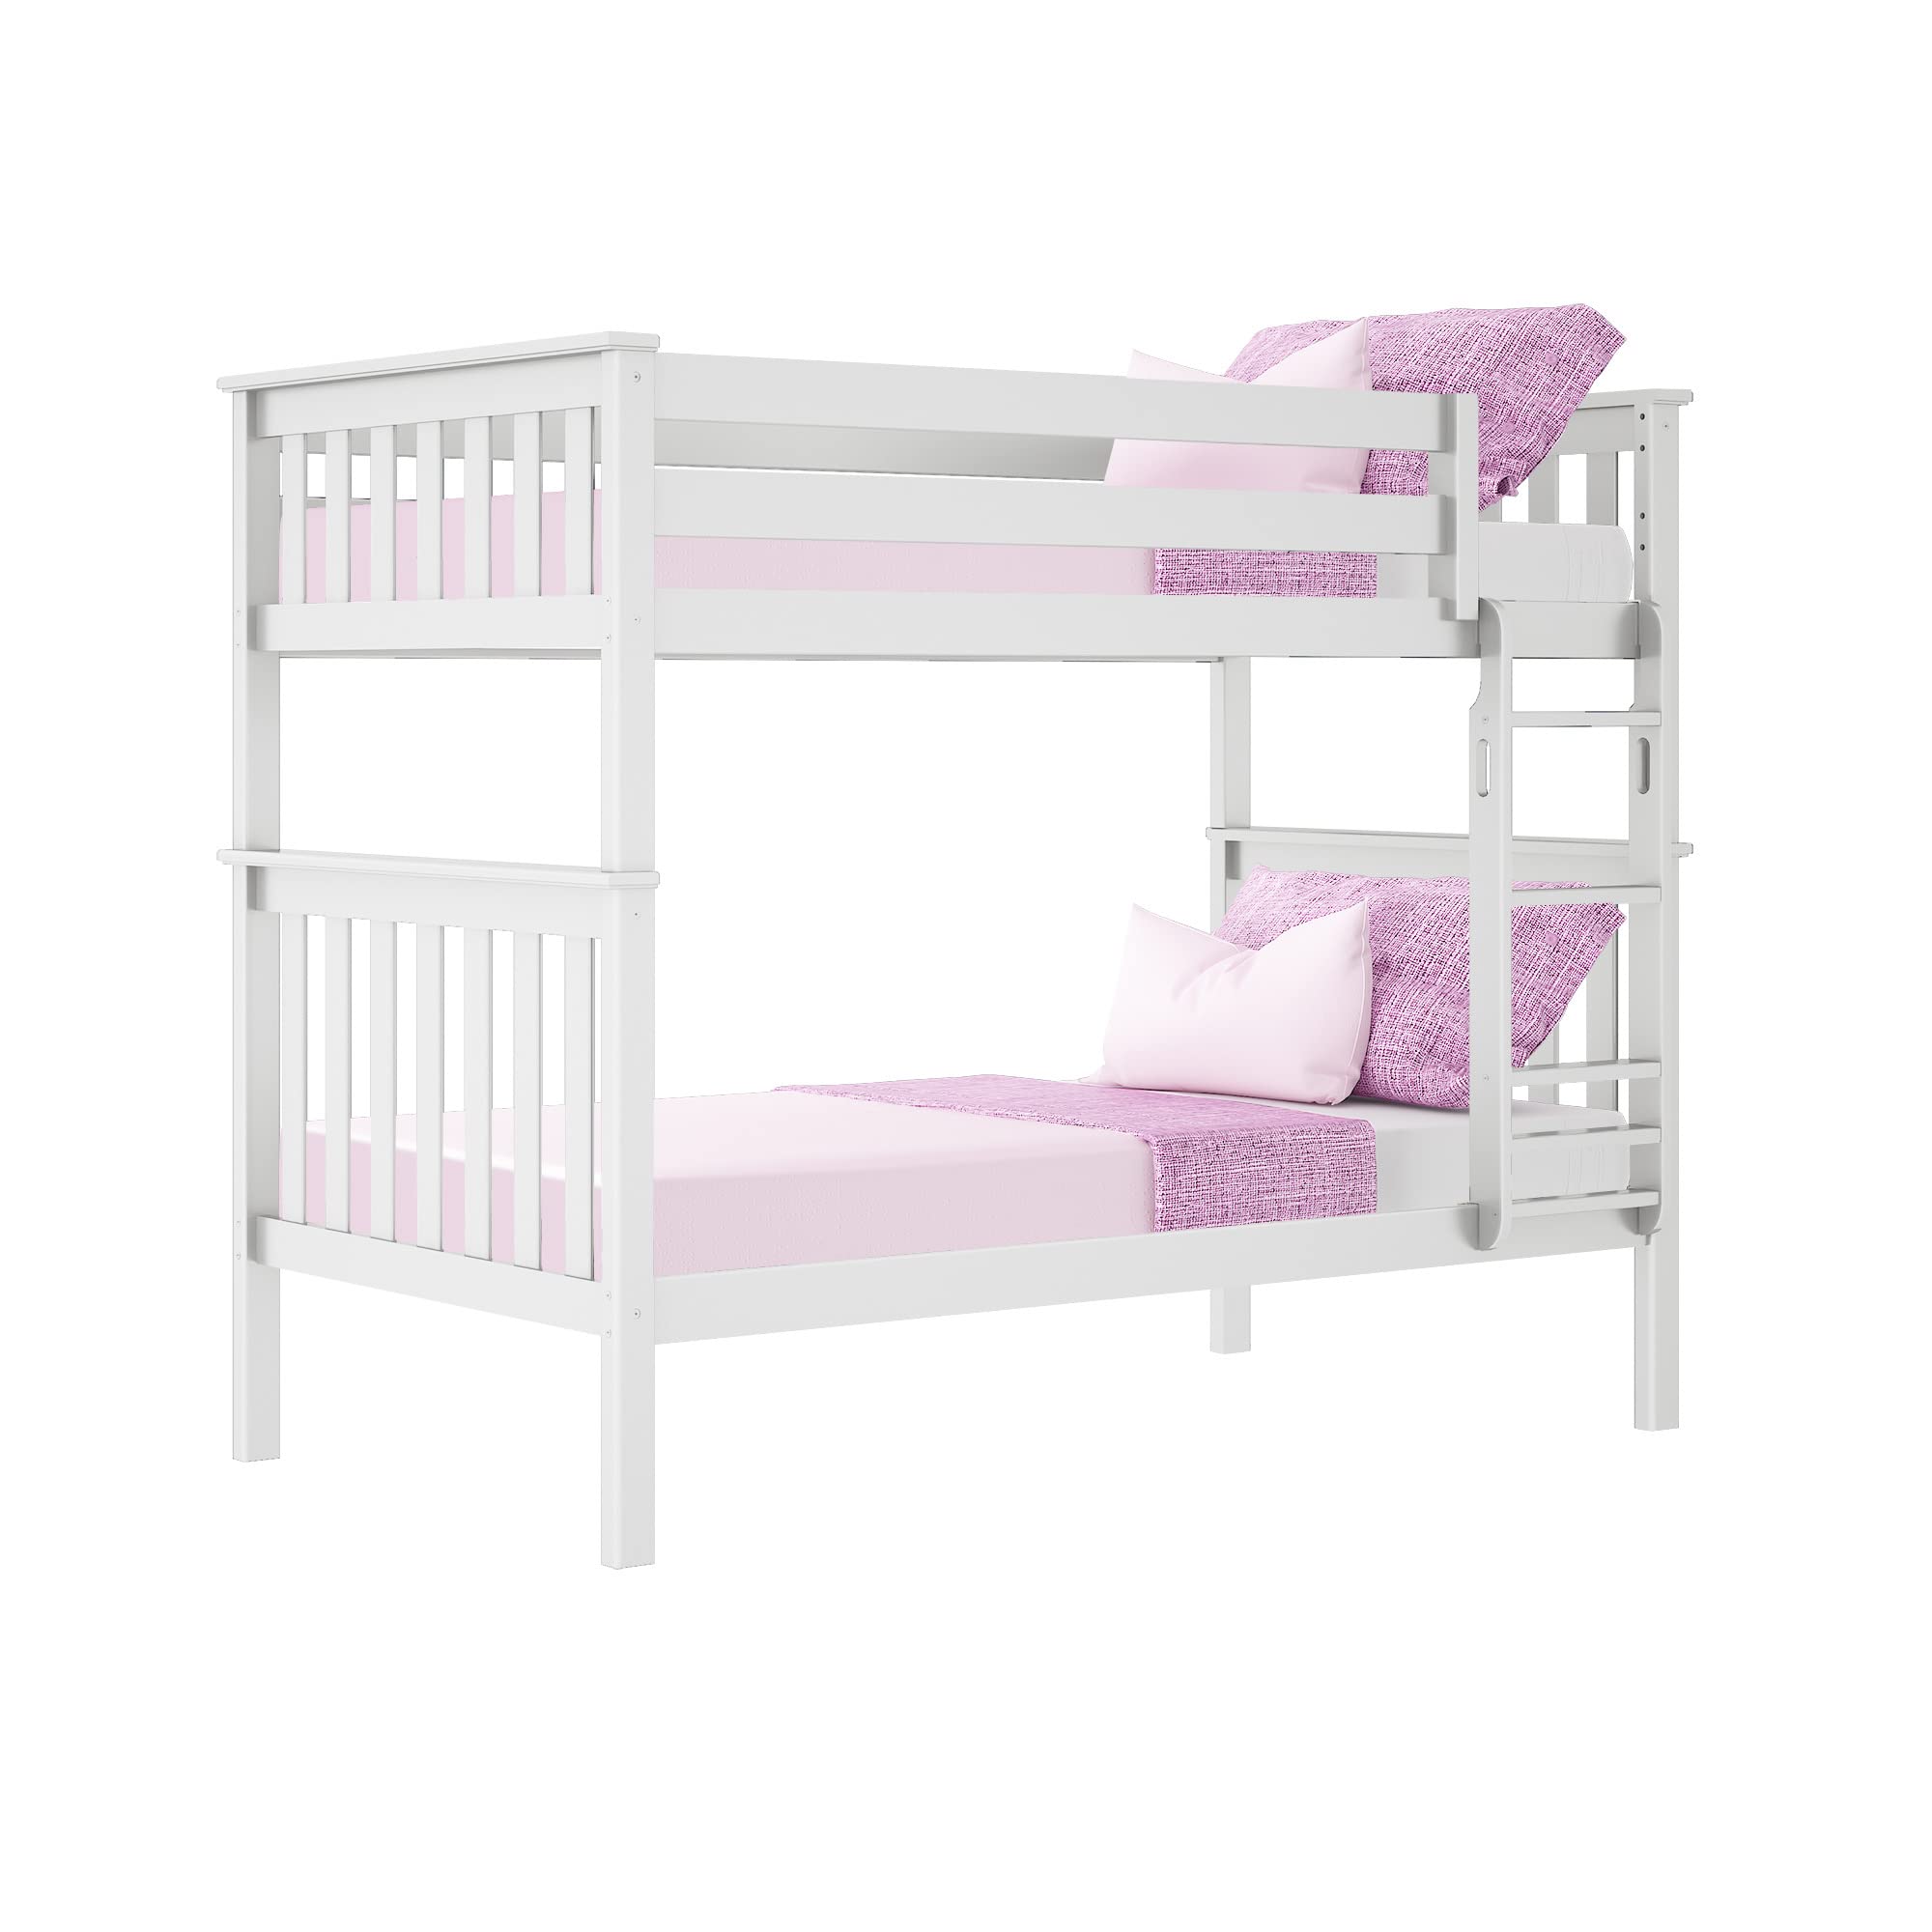 Max & Lily Twin over Twin Bunk Bed, Solid Wood Frame with Ladder, 14" Safety Guardrails, Easy Assembly, No Box Spring Needed, White